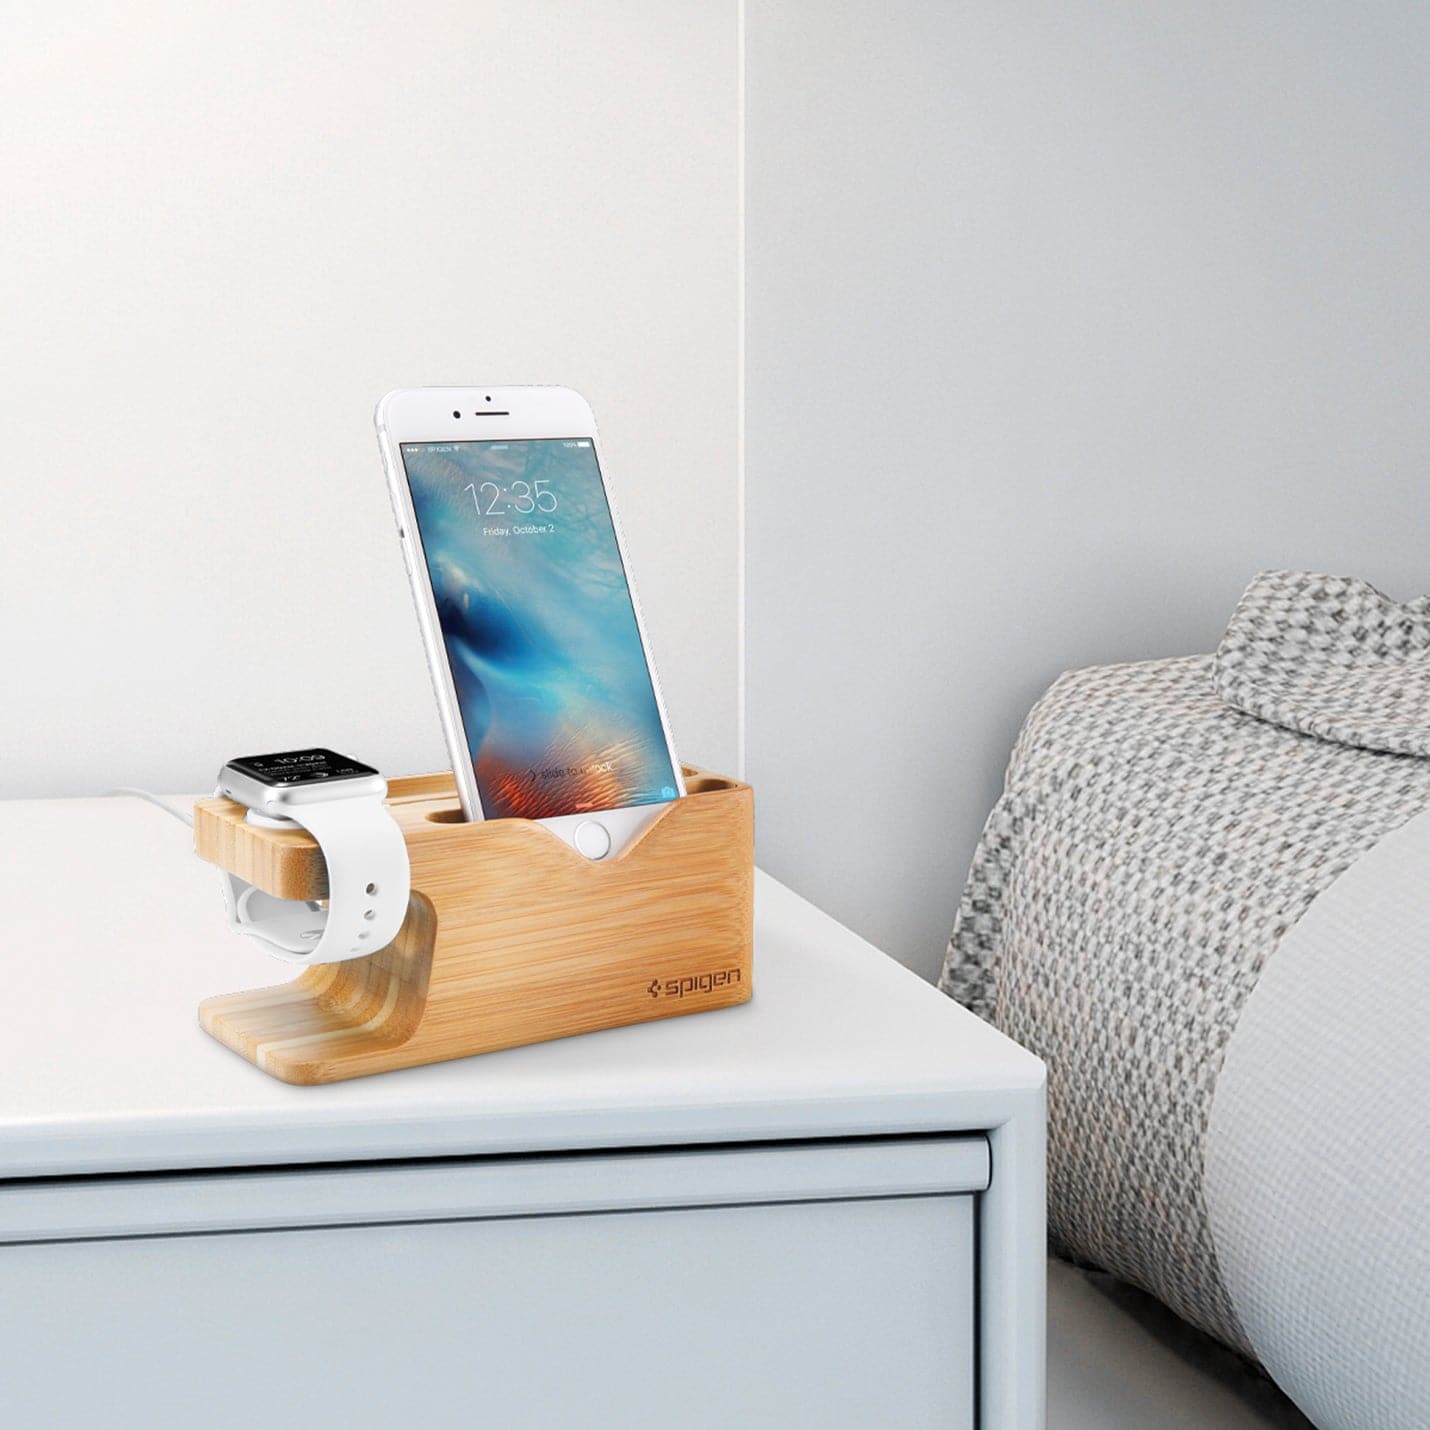 000ST20295 - Apple Watch + Phone Stand S370 showing the front and side with phone and watch on stand on nightstand